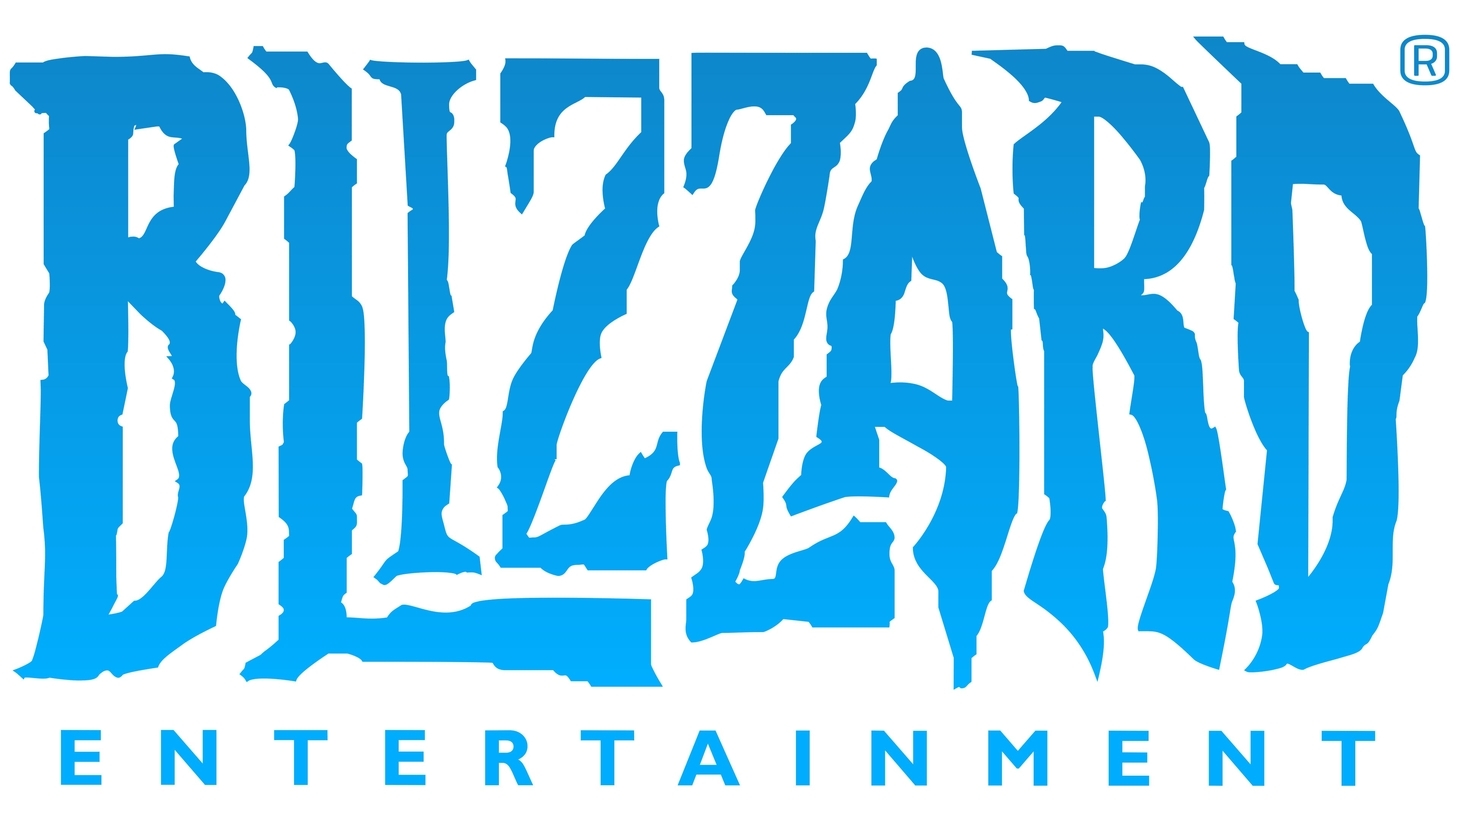 Blizzard sign